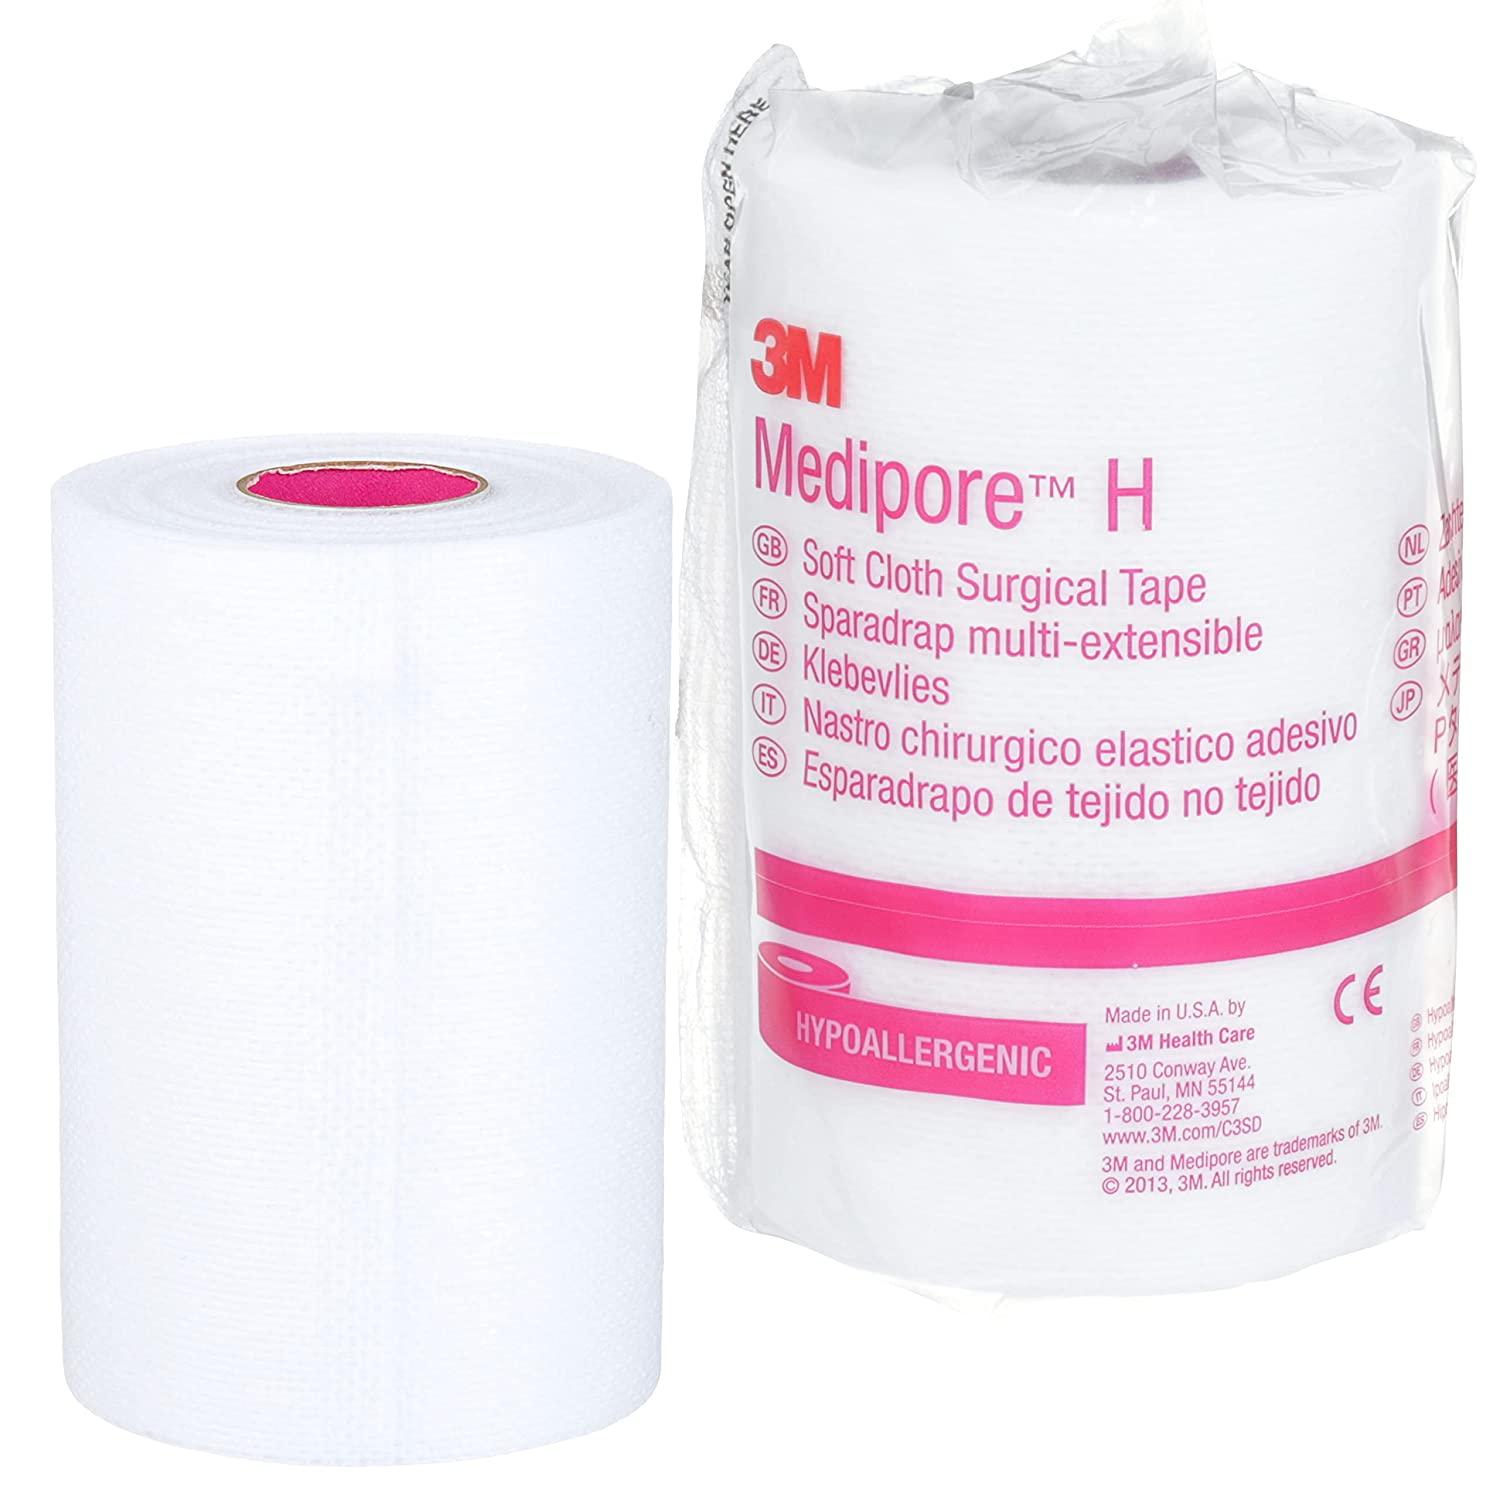 3M Medipore Soft Cloth Surgical Tape (4 in x 10 yd)